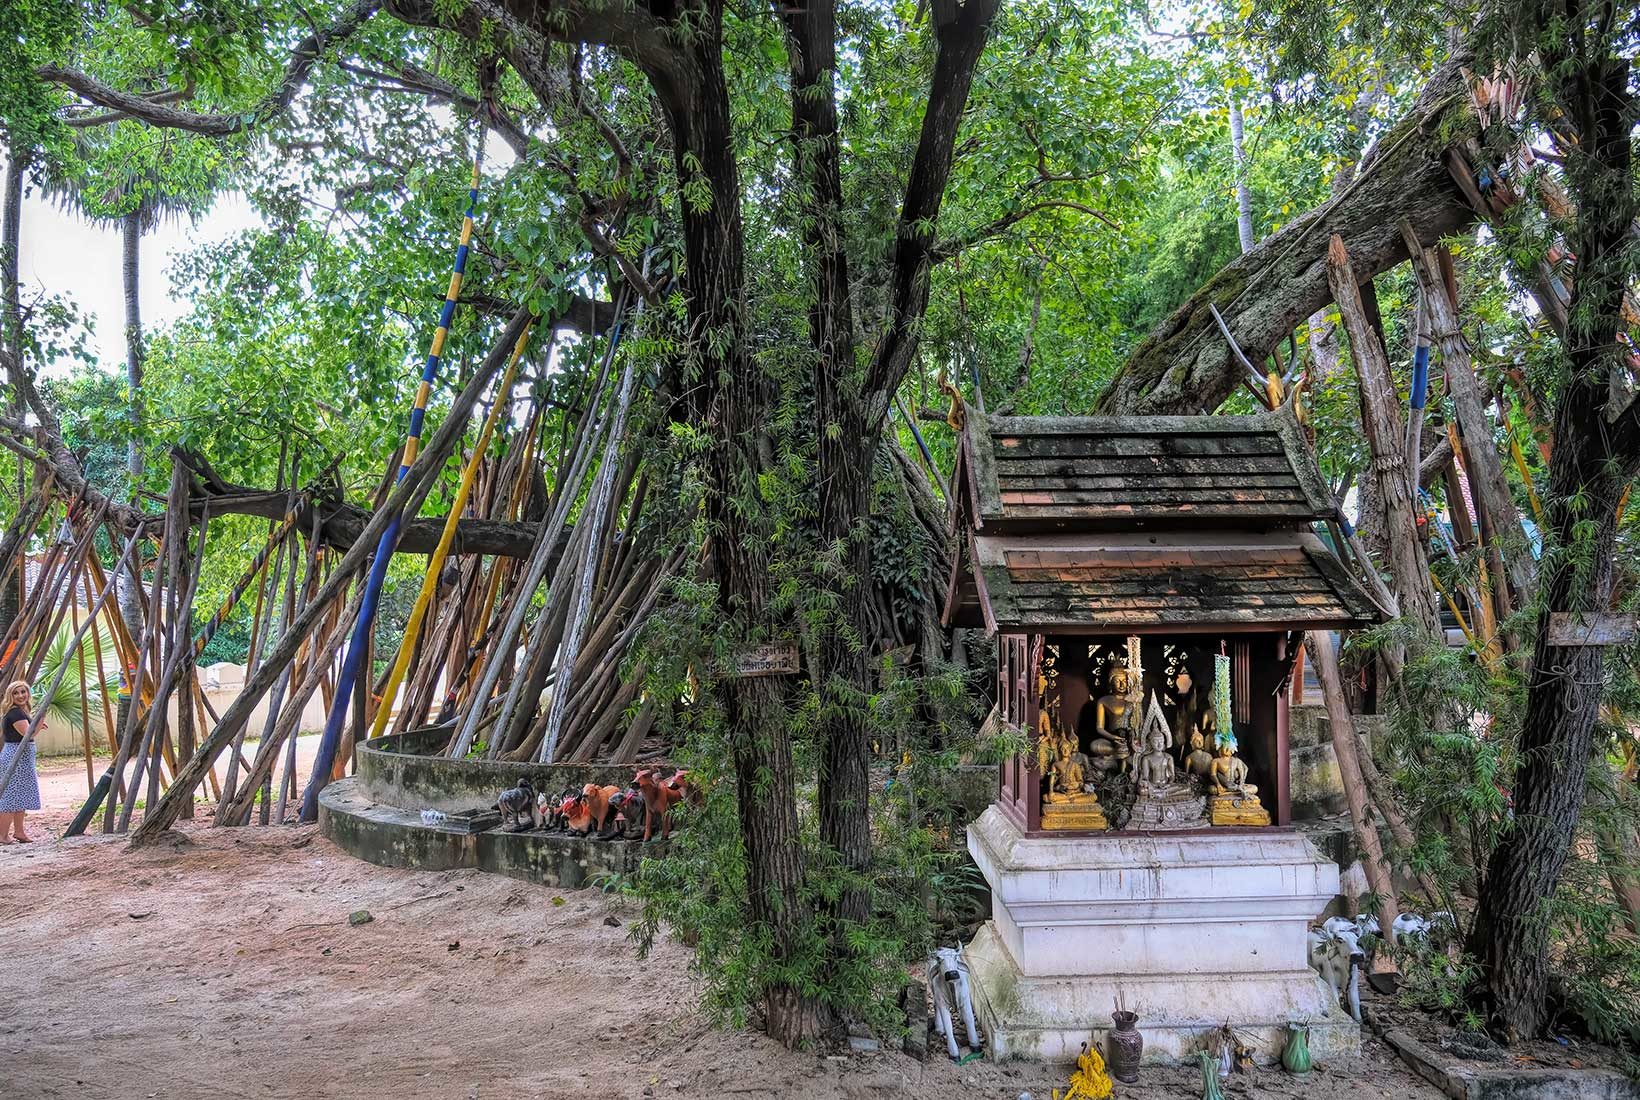 Dozens of bamboo support poles, donated by worshipers, support the limbs of this Bodhi Tree at Wat Phrathat Lampang Luang in Lampang, Thailand